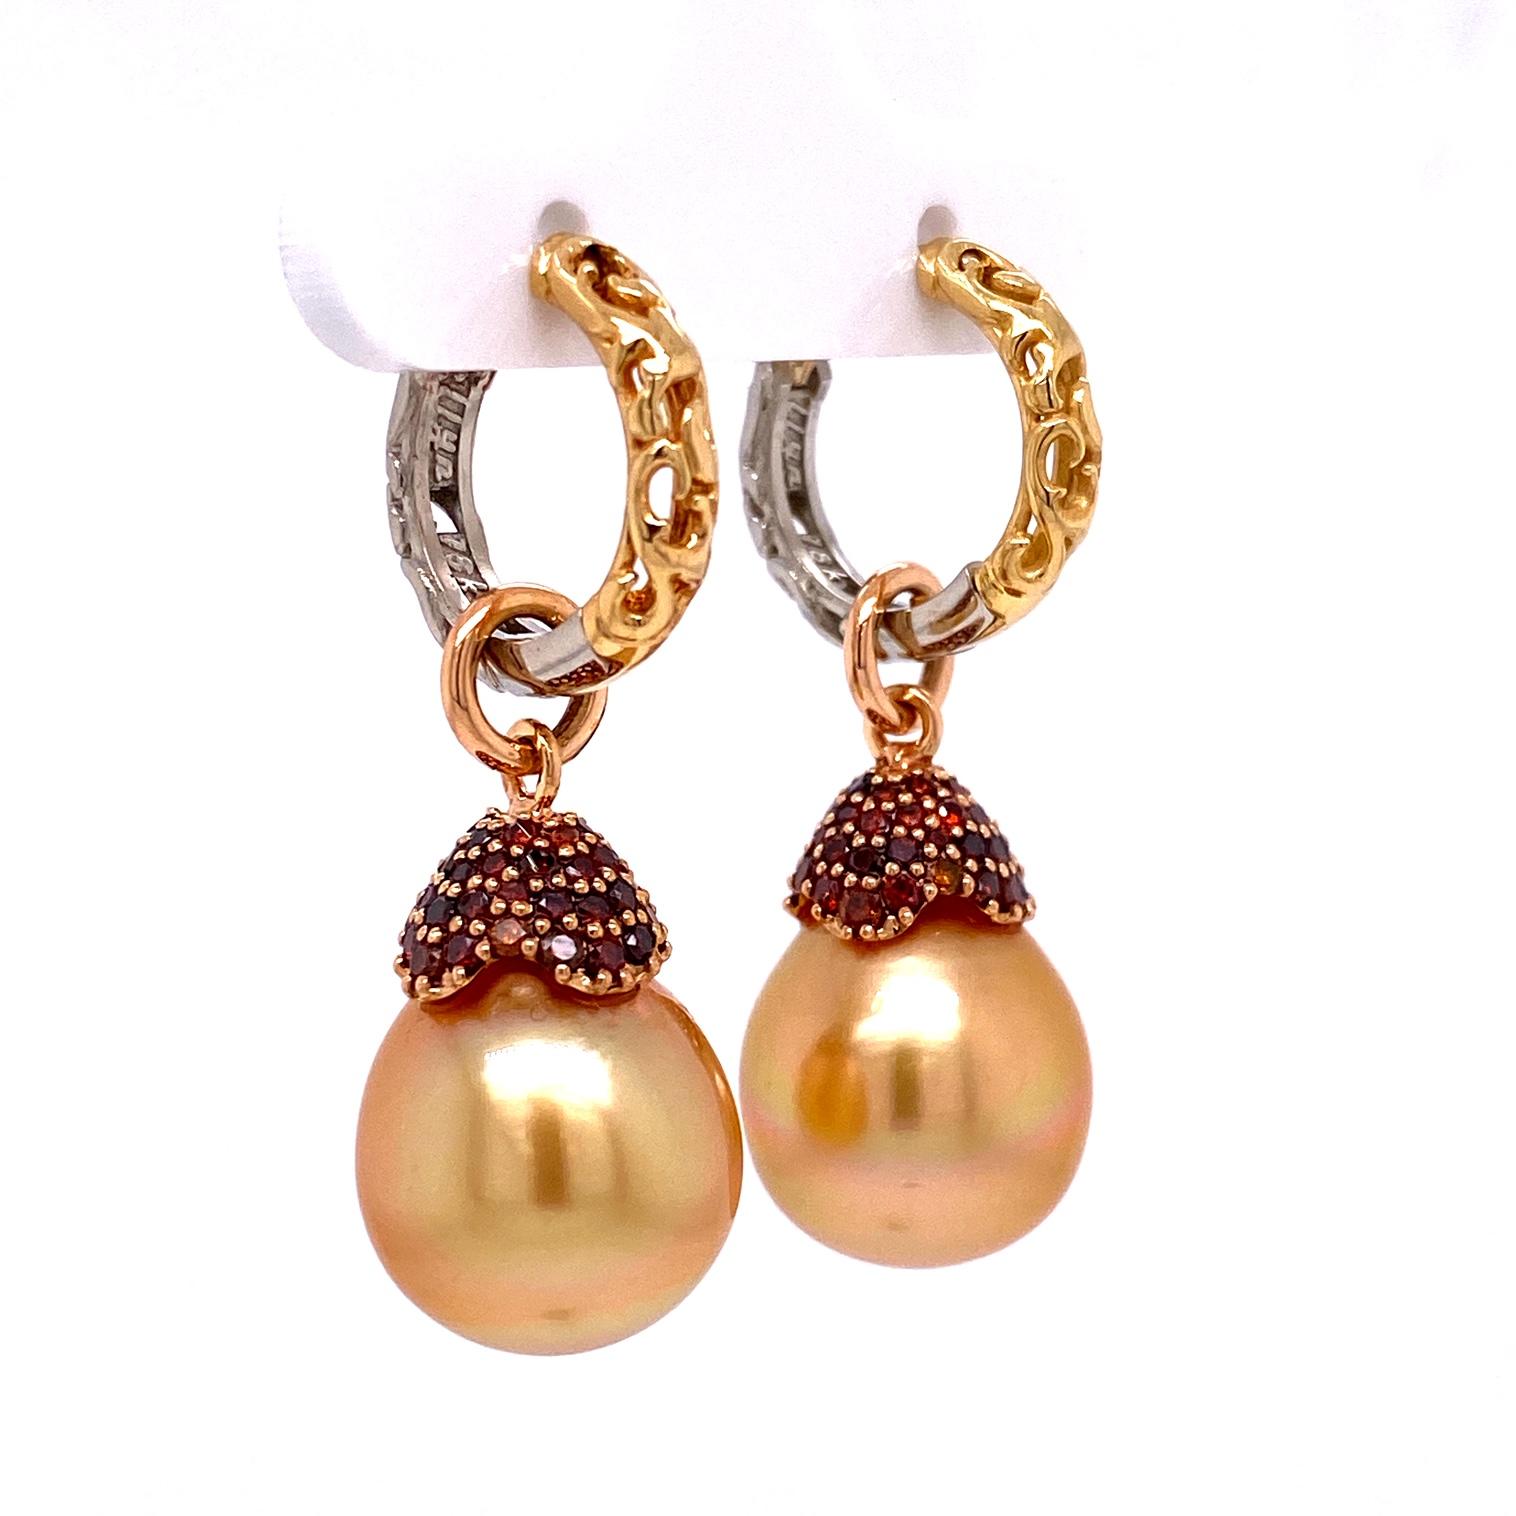 A pair of reversible 18k yellow and white gold scroll style huggie hoops, with a pair of 12x15.5mm golden south sea pearls with 18k rose gold caps set with 104 cabernet colored diamonds, .86tcw. These earrings were made and designed by llyn